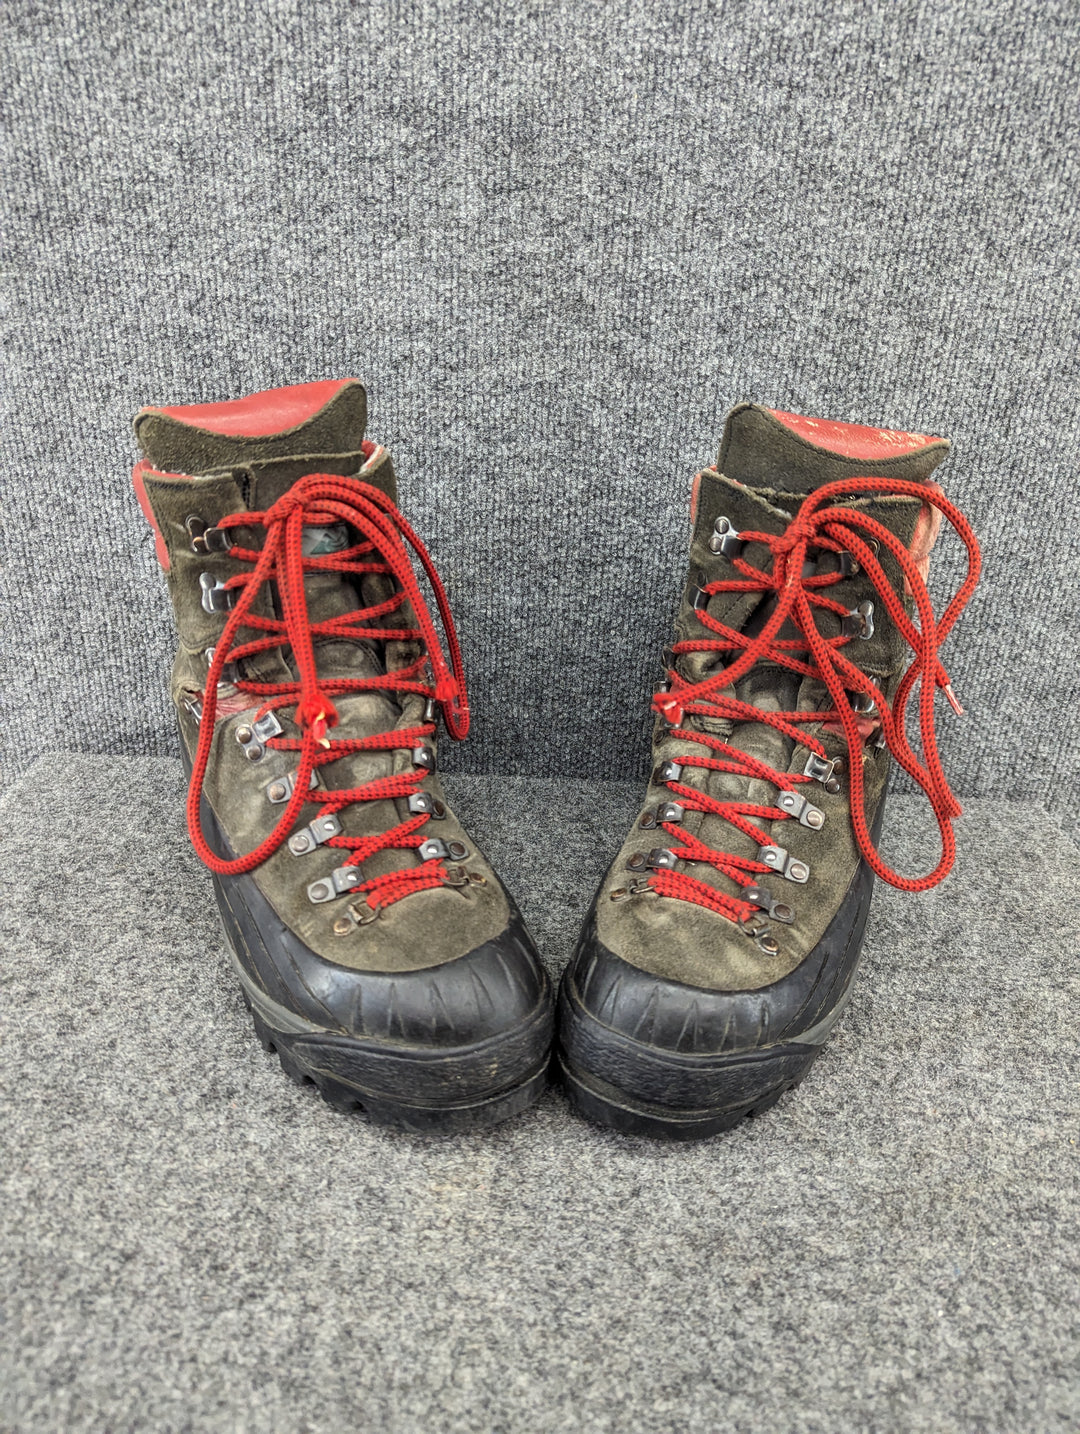 Montrail Size 10/43 Men's Mountaineering Boots